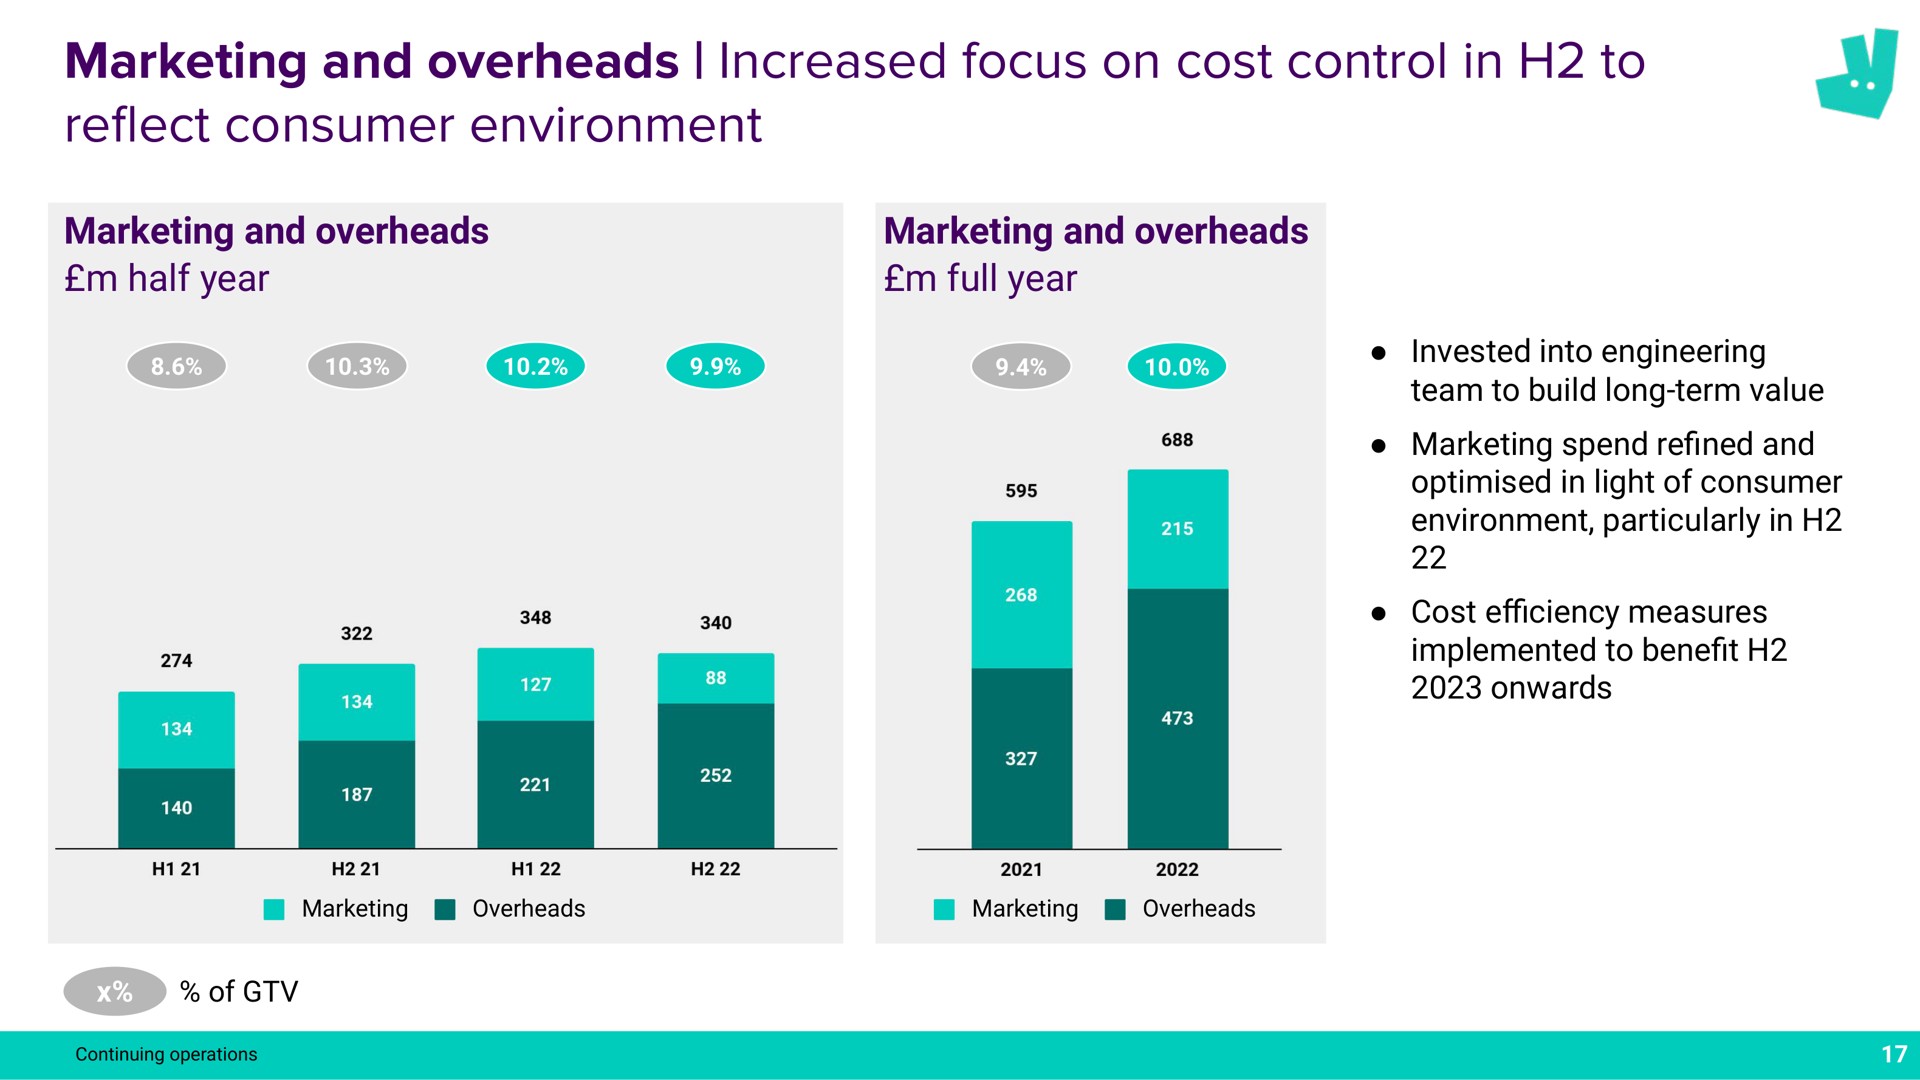 marketing and overheads increased focus on cost control in to consumer environment reflect a | Deliveroo